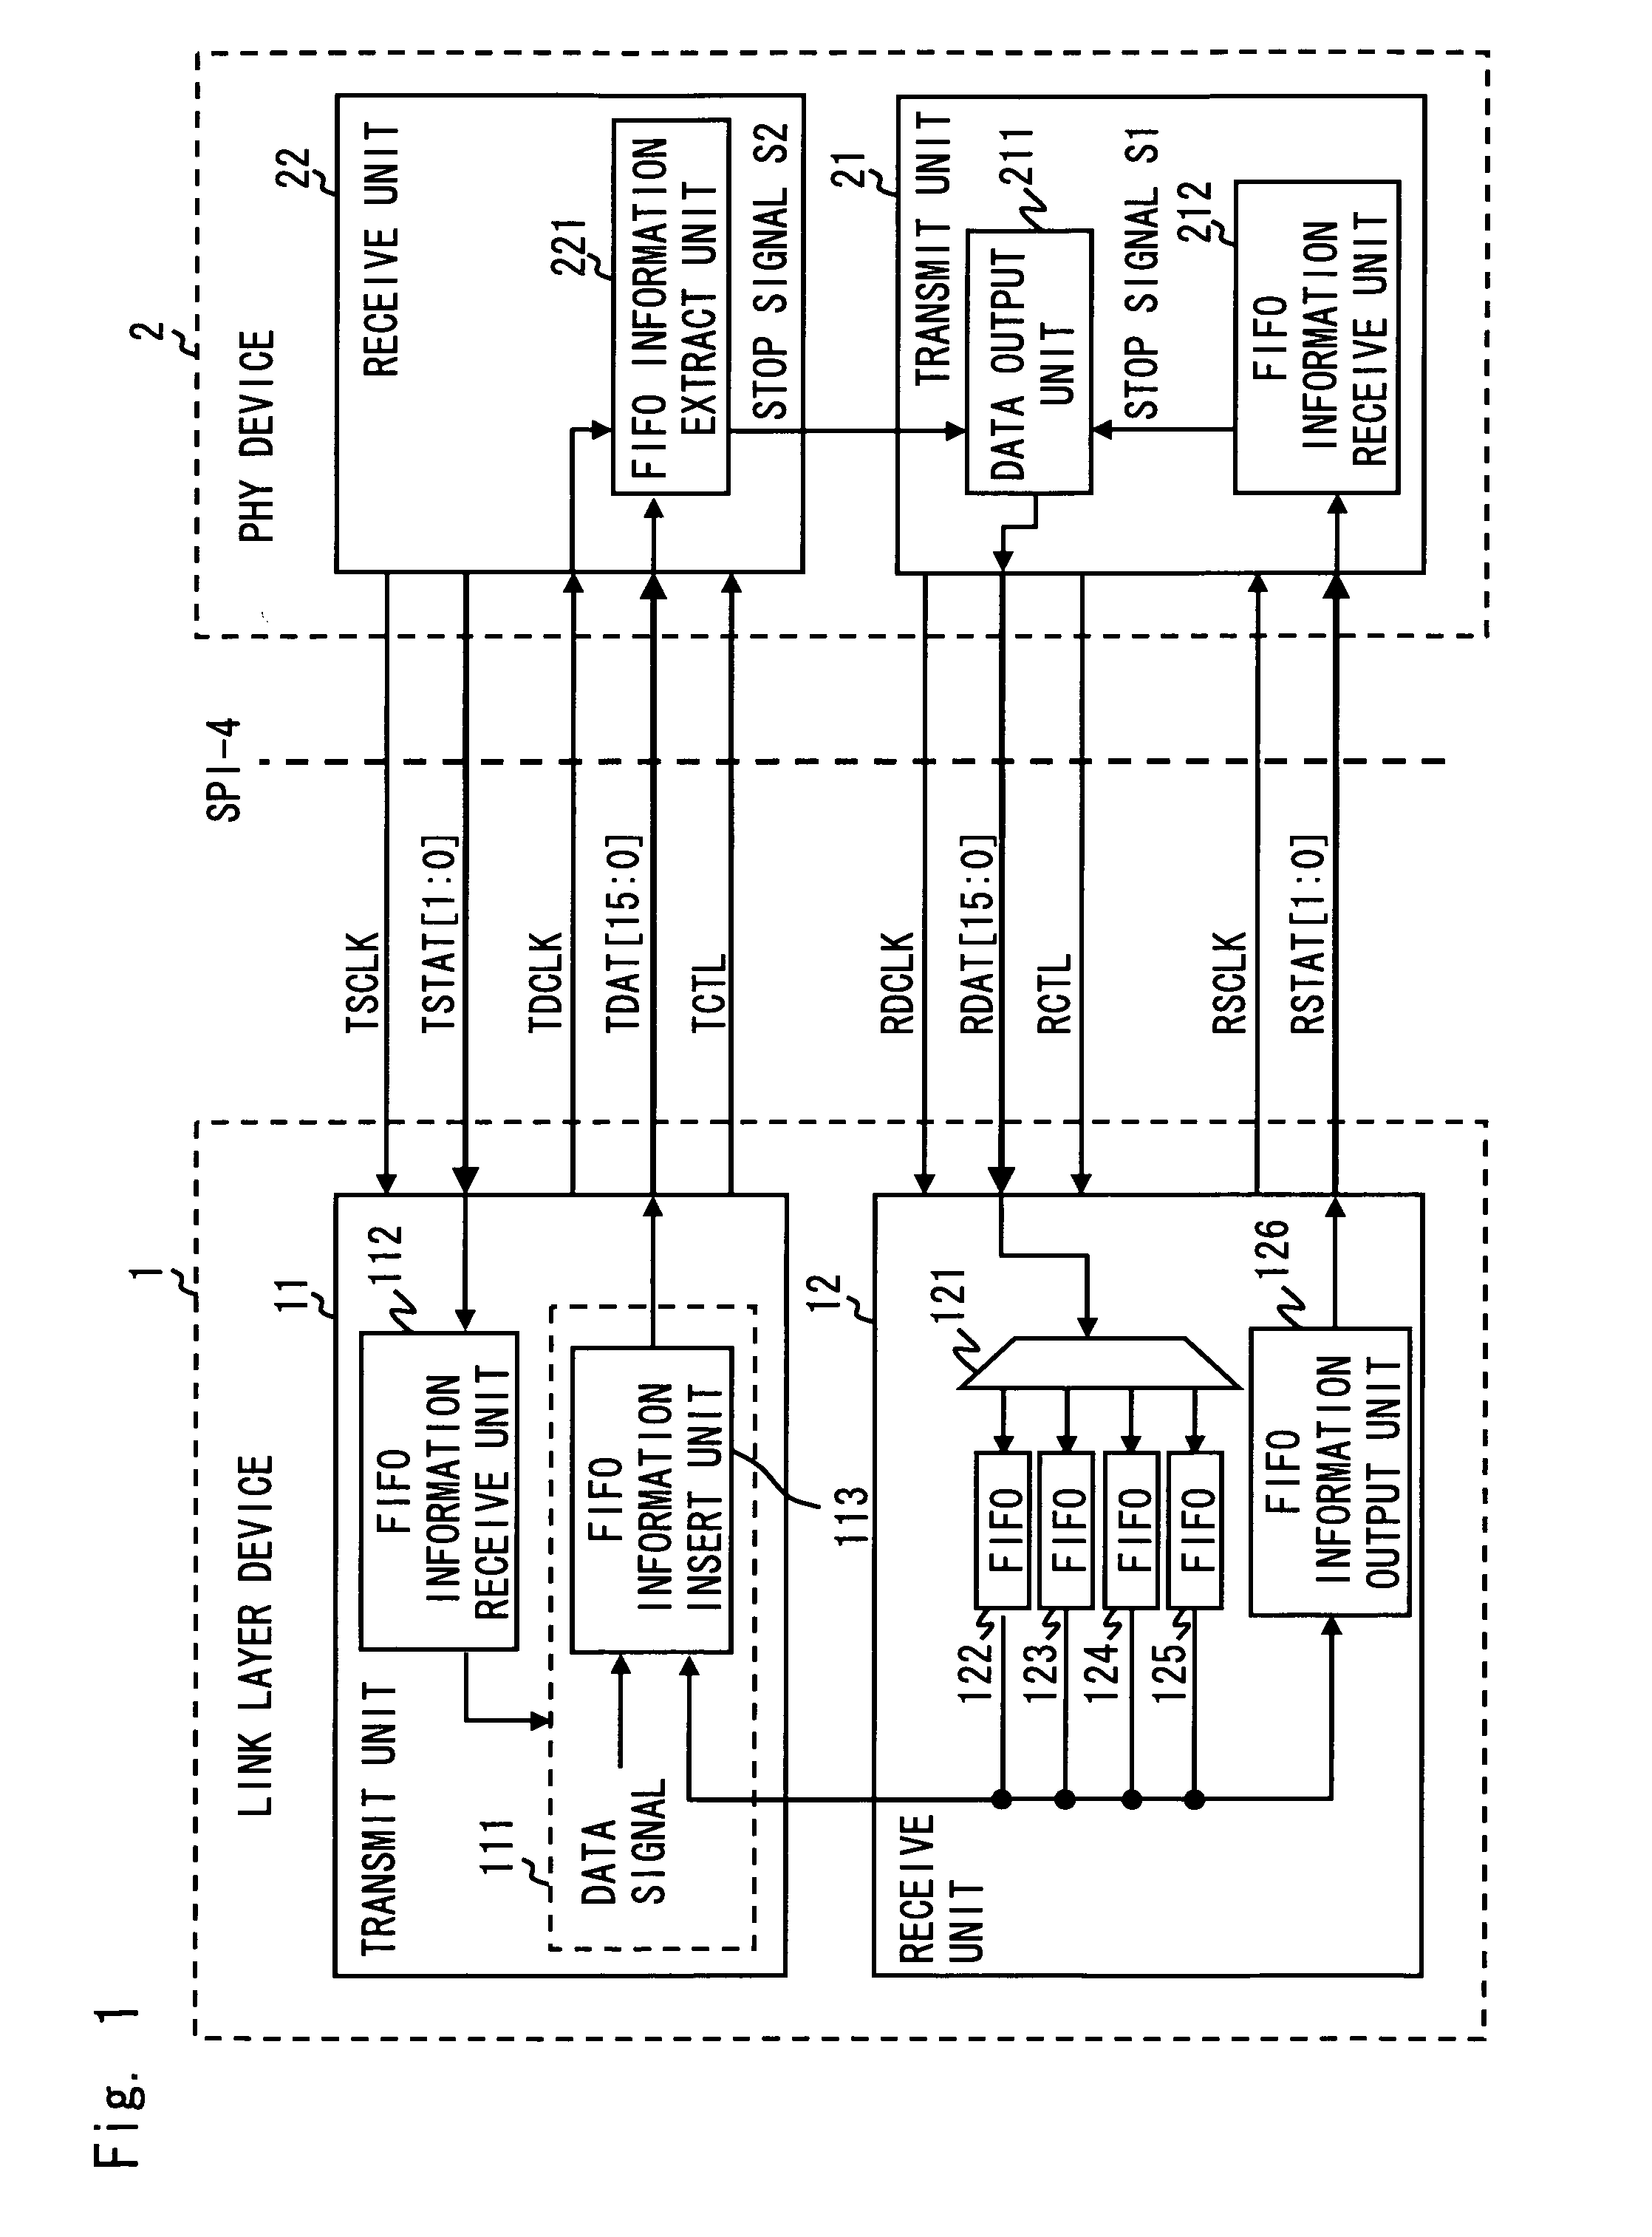 Communication system, communication device and flow control based on status information of data buffer usage